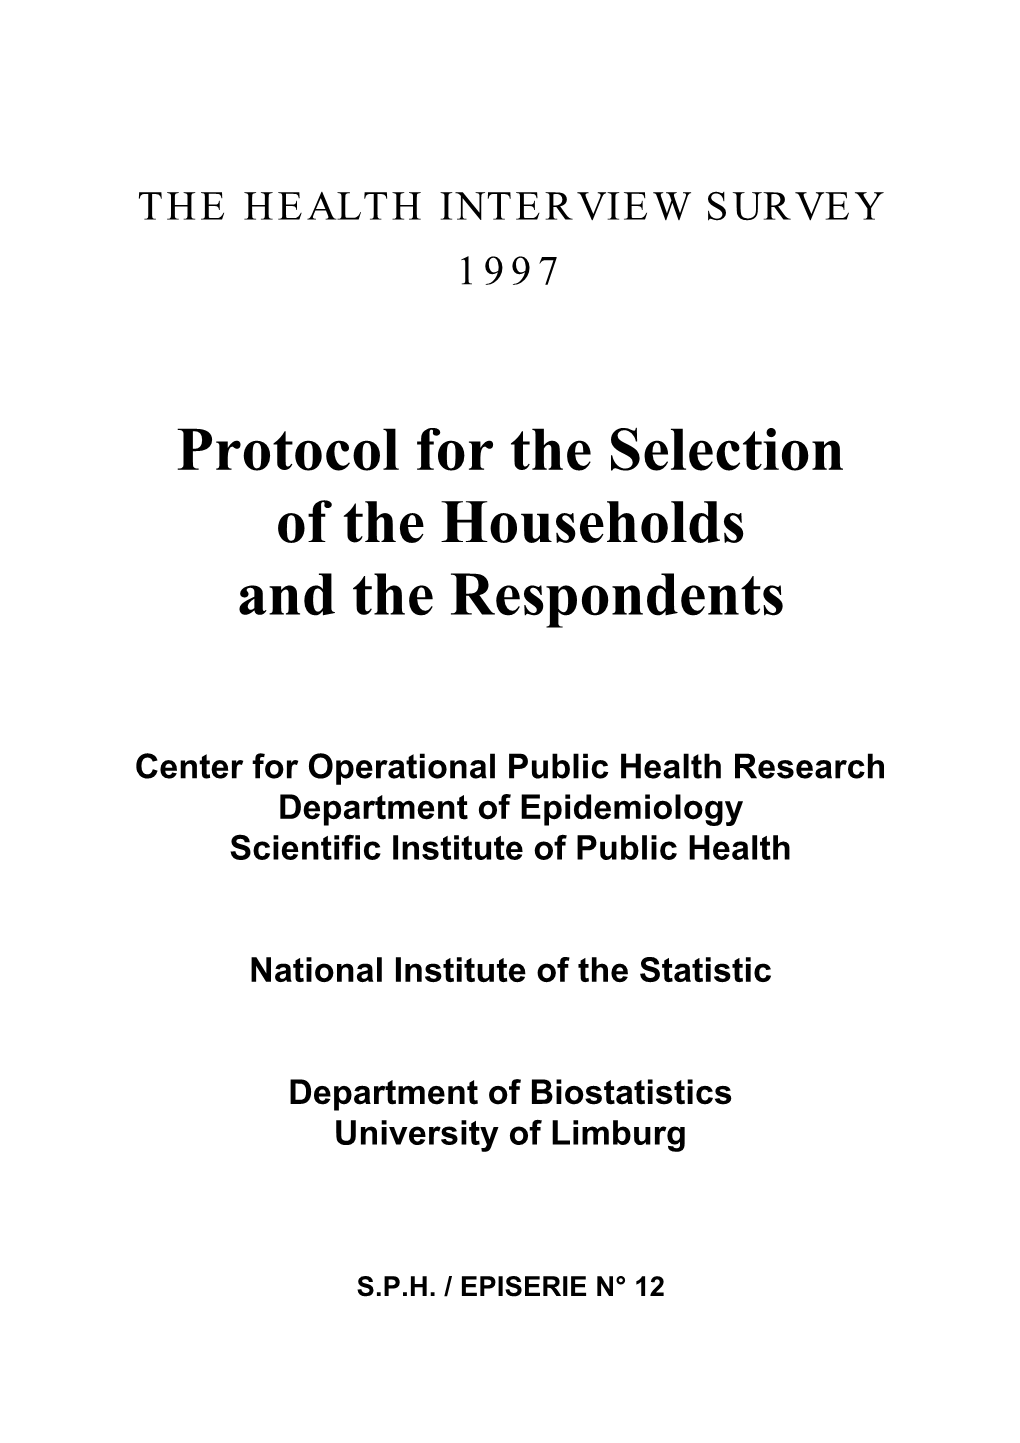 Protocol for the Selection of the Households and the Respondents